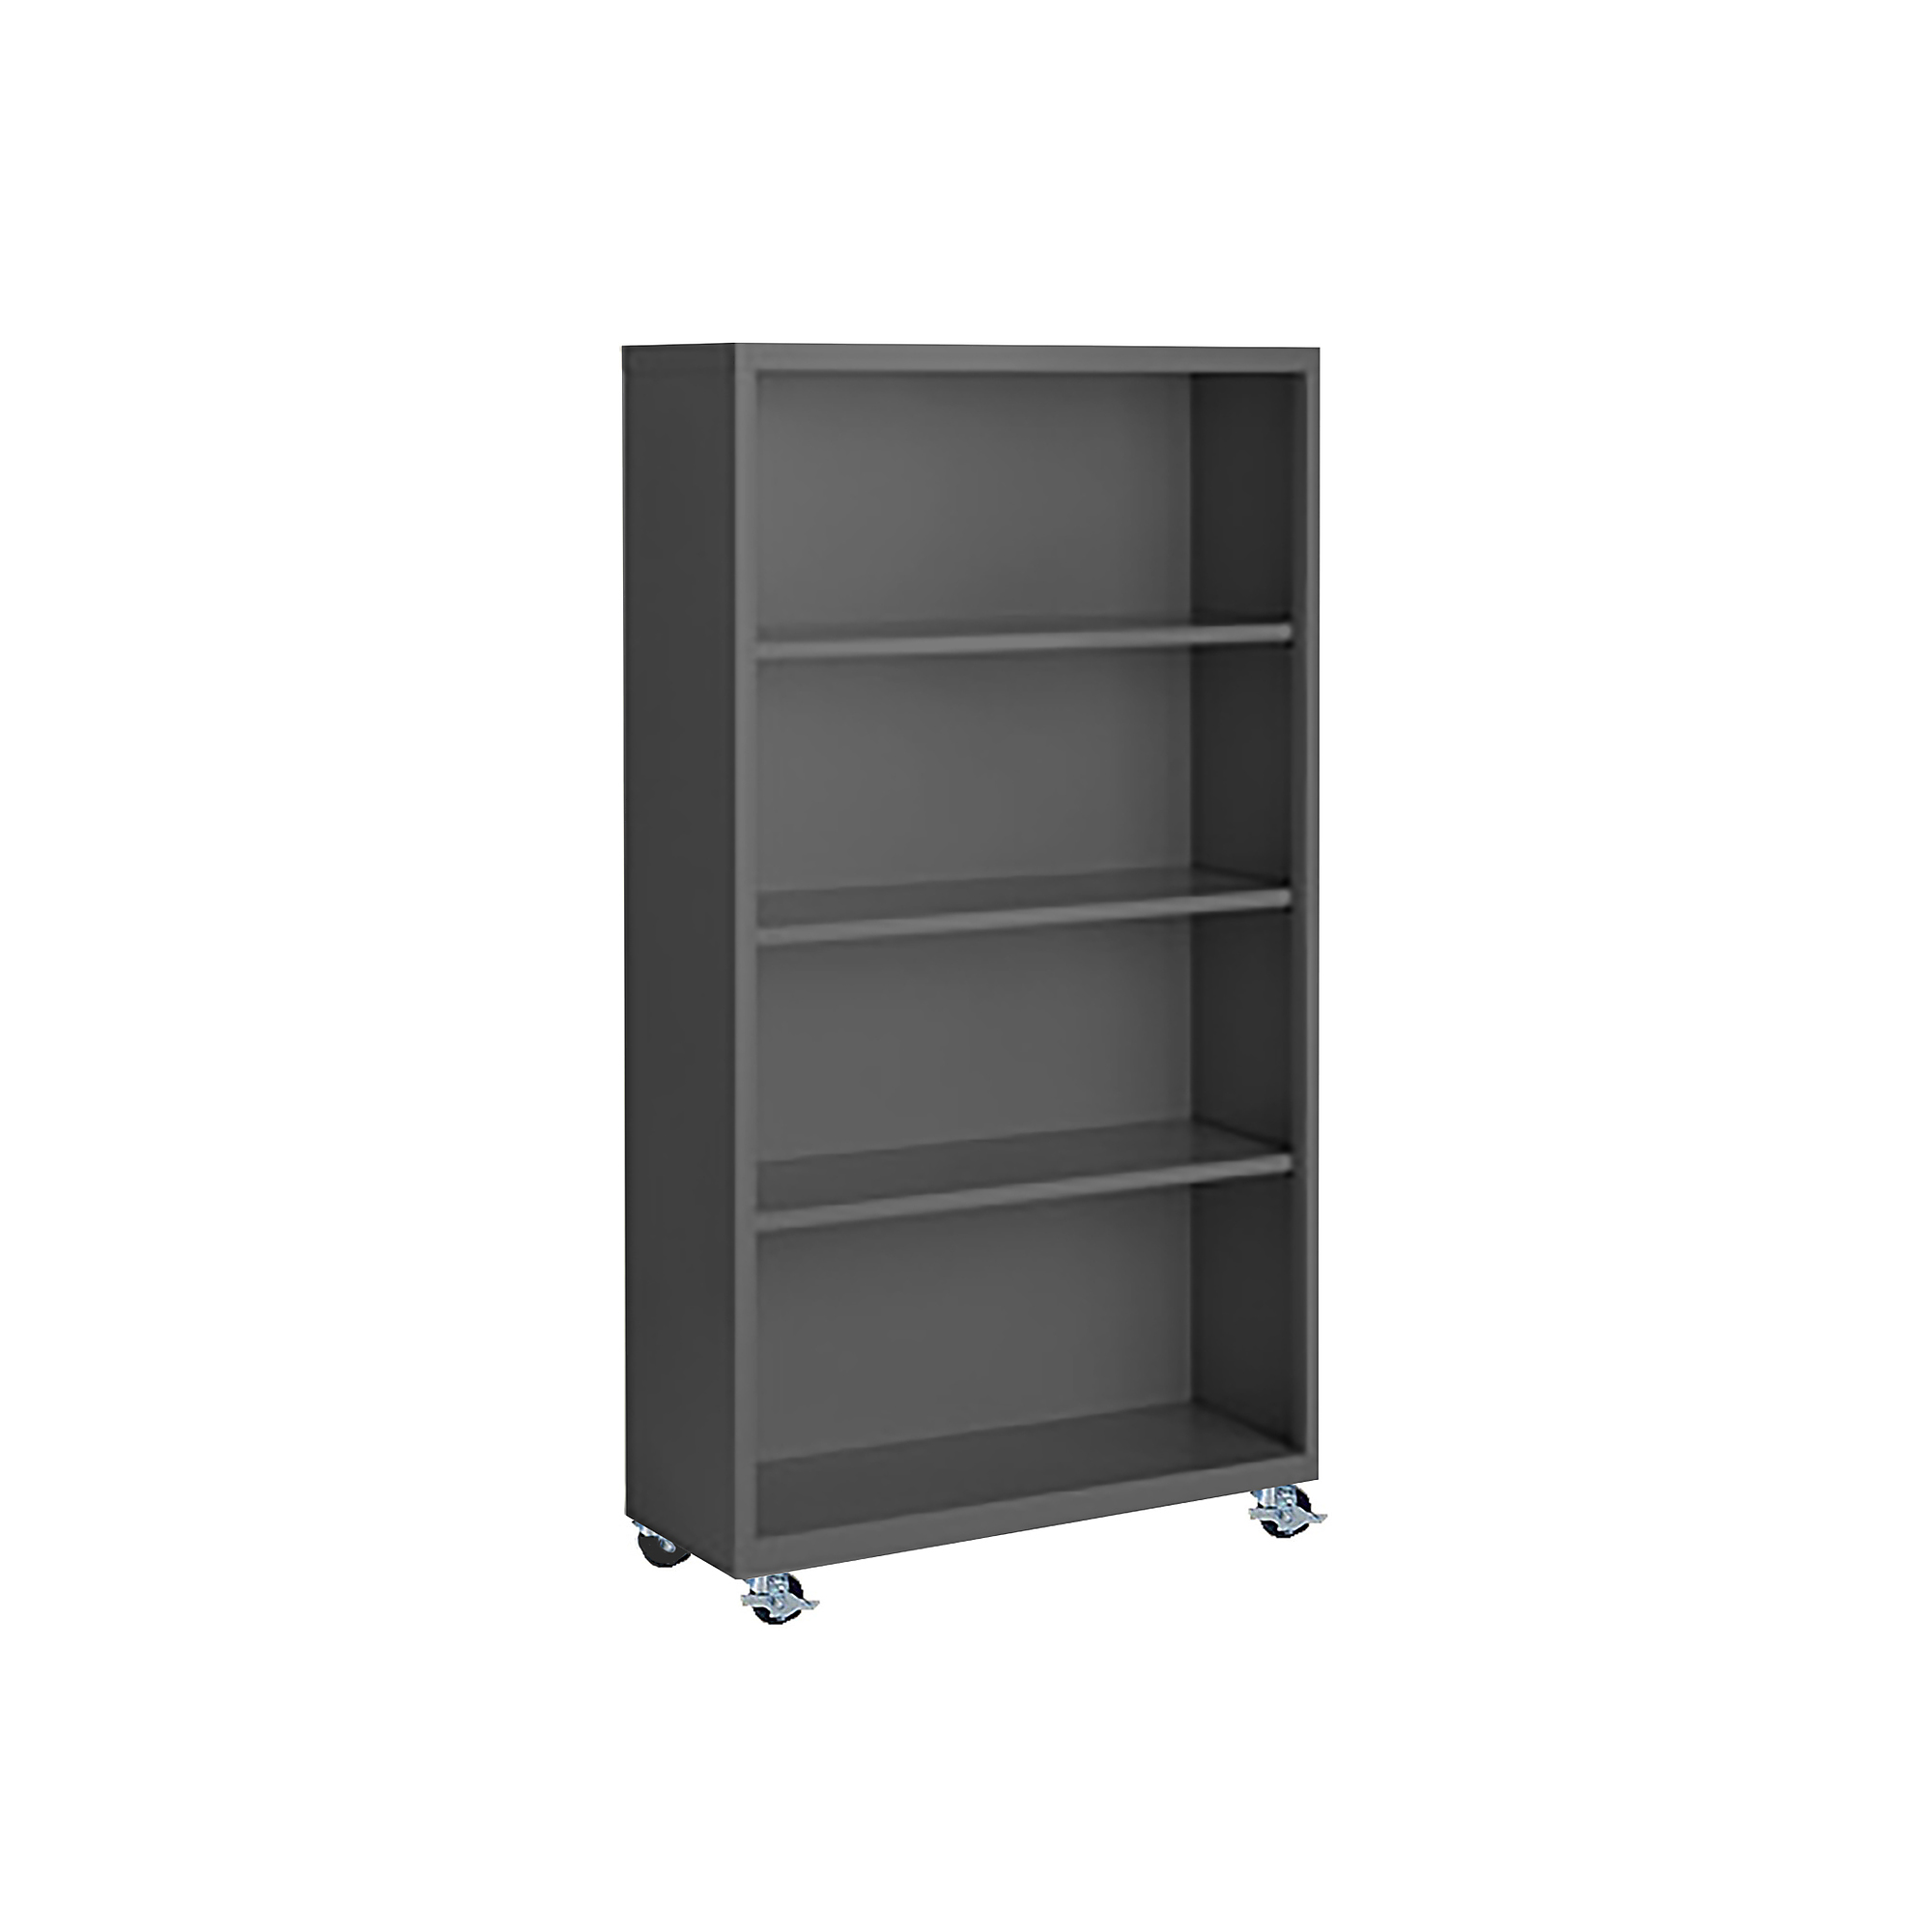 Steel Cabinets USA, 36Inchx18Inchx63Inch Charcoal Mobile Bookcase Assembled, Height 63 in, Shelves (qty.) 4, Material Steel, Model MBCA-366318-C